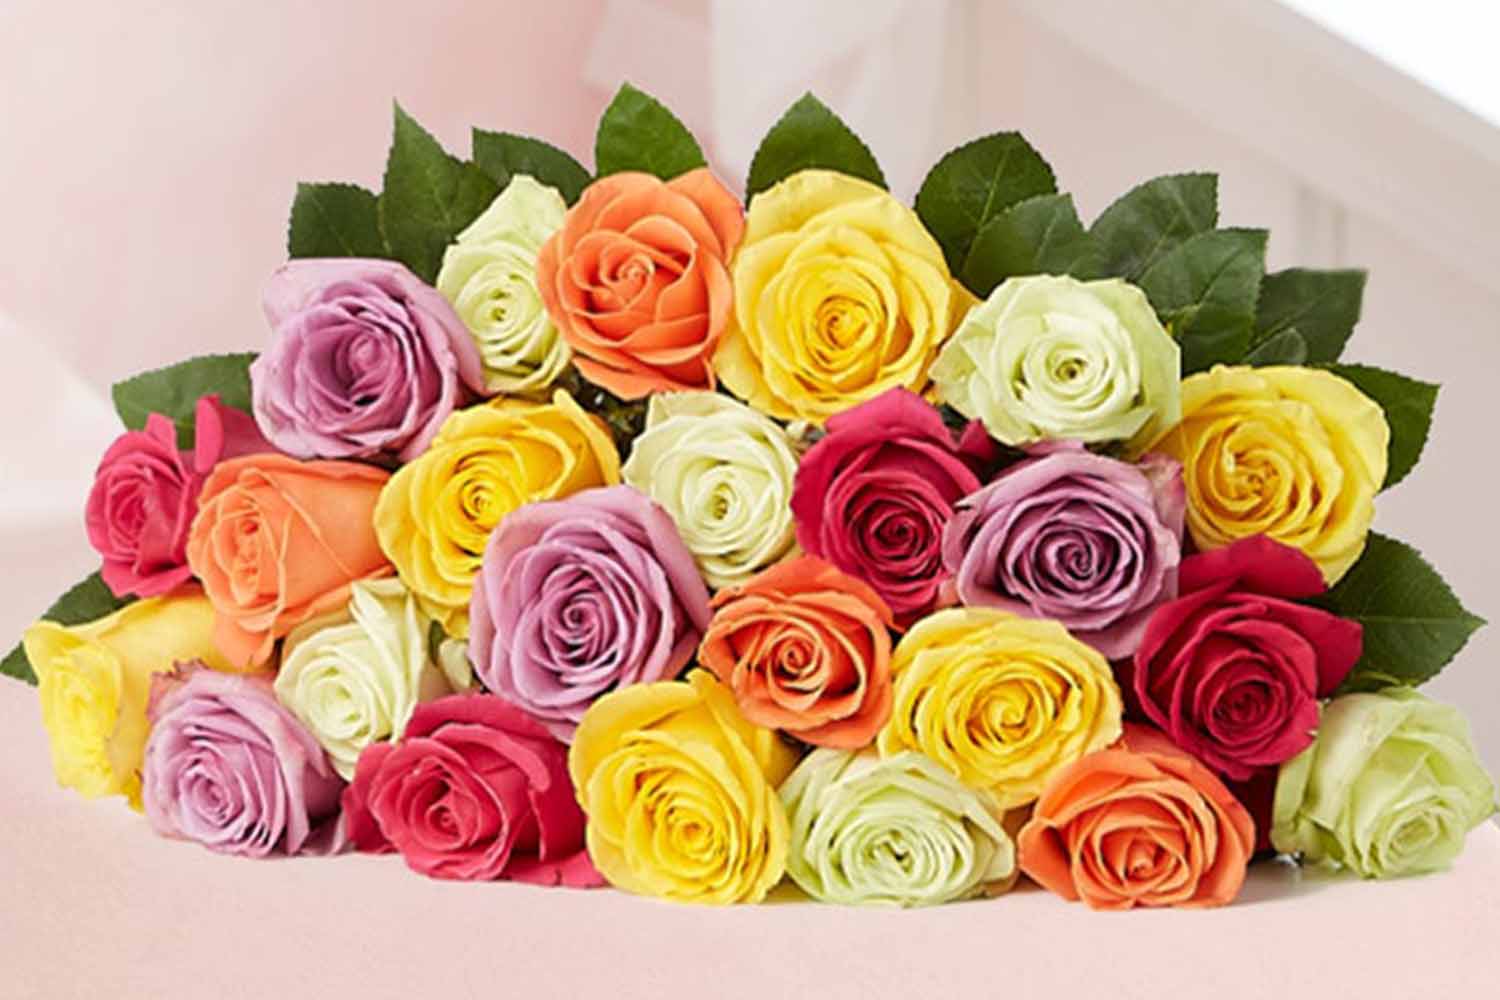 Two Dozen Assorted Roses from 1-800-Flowers.com